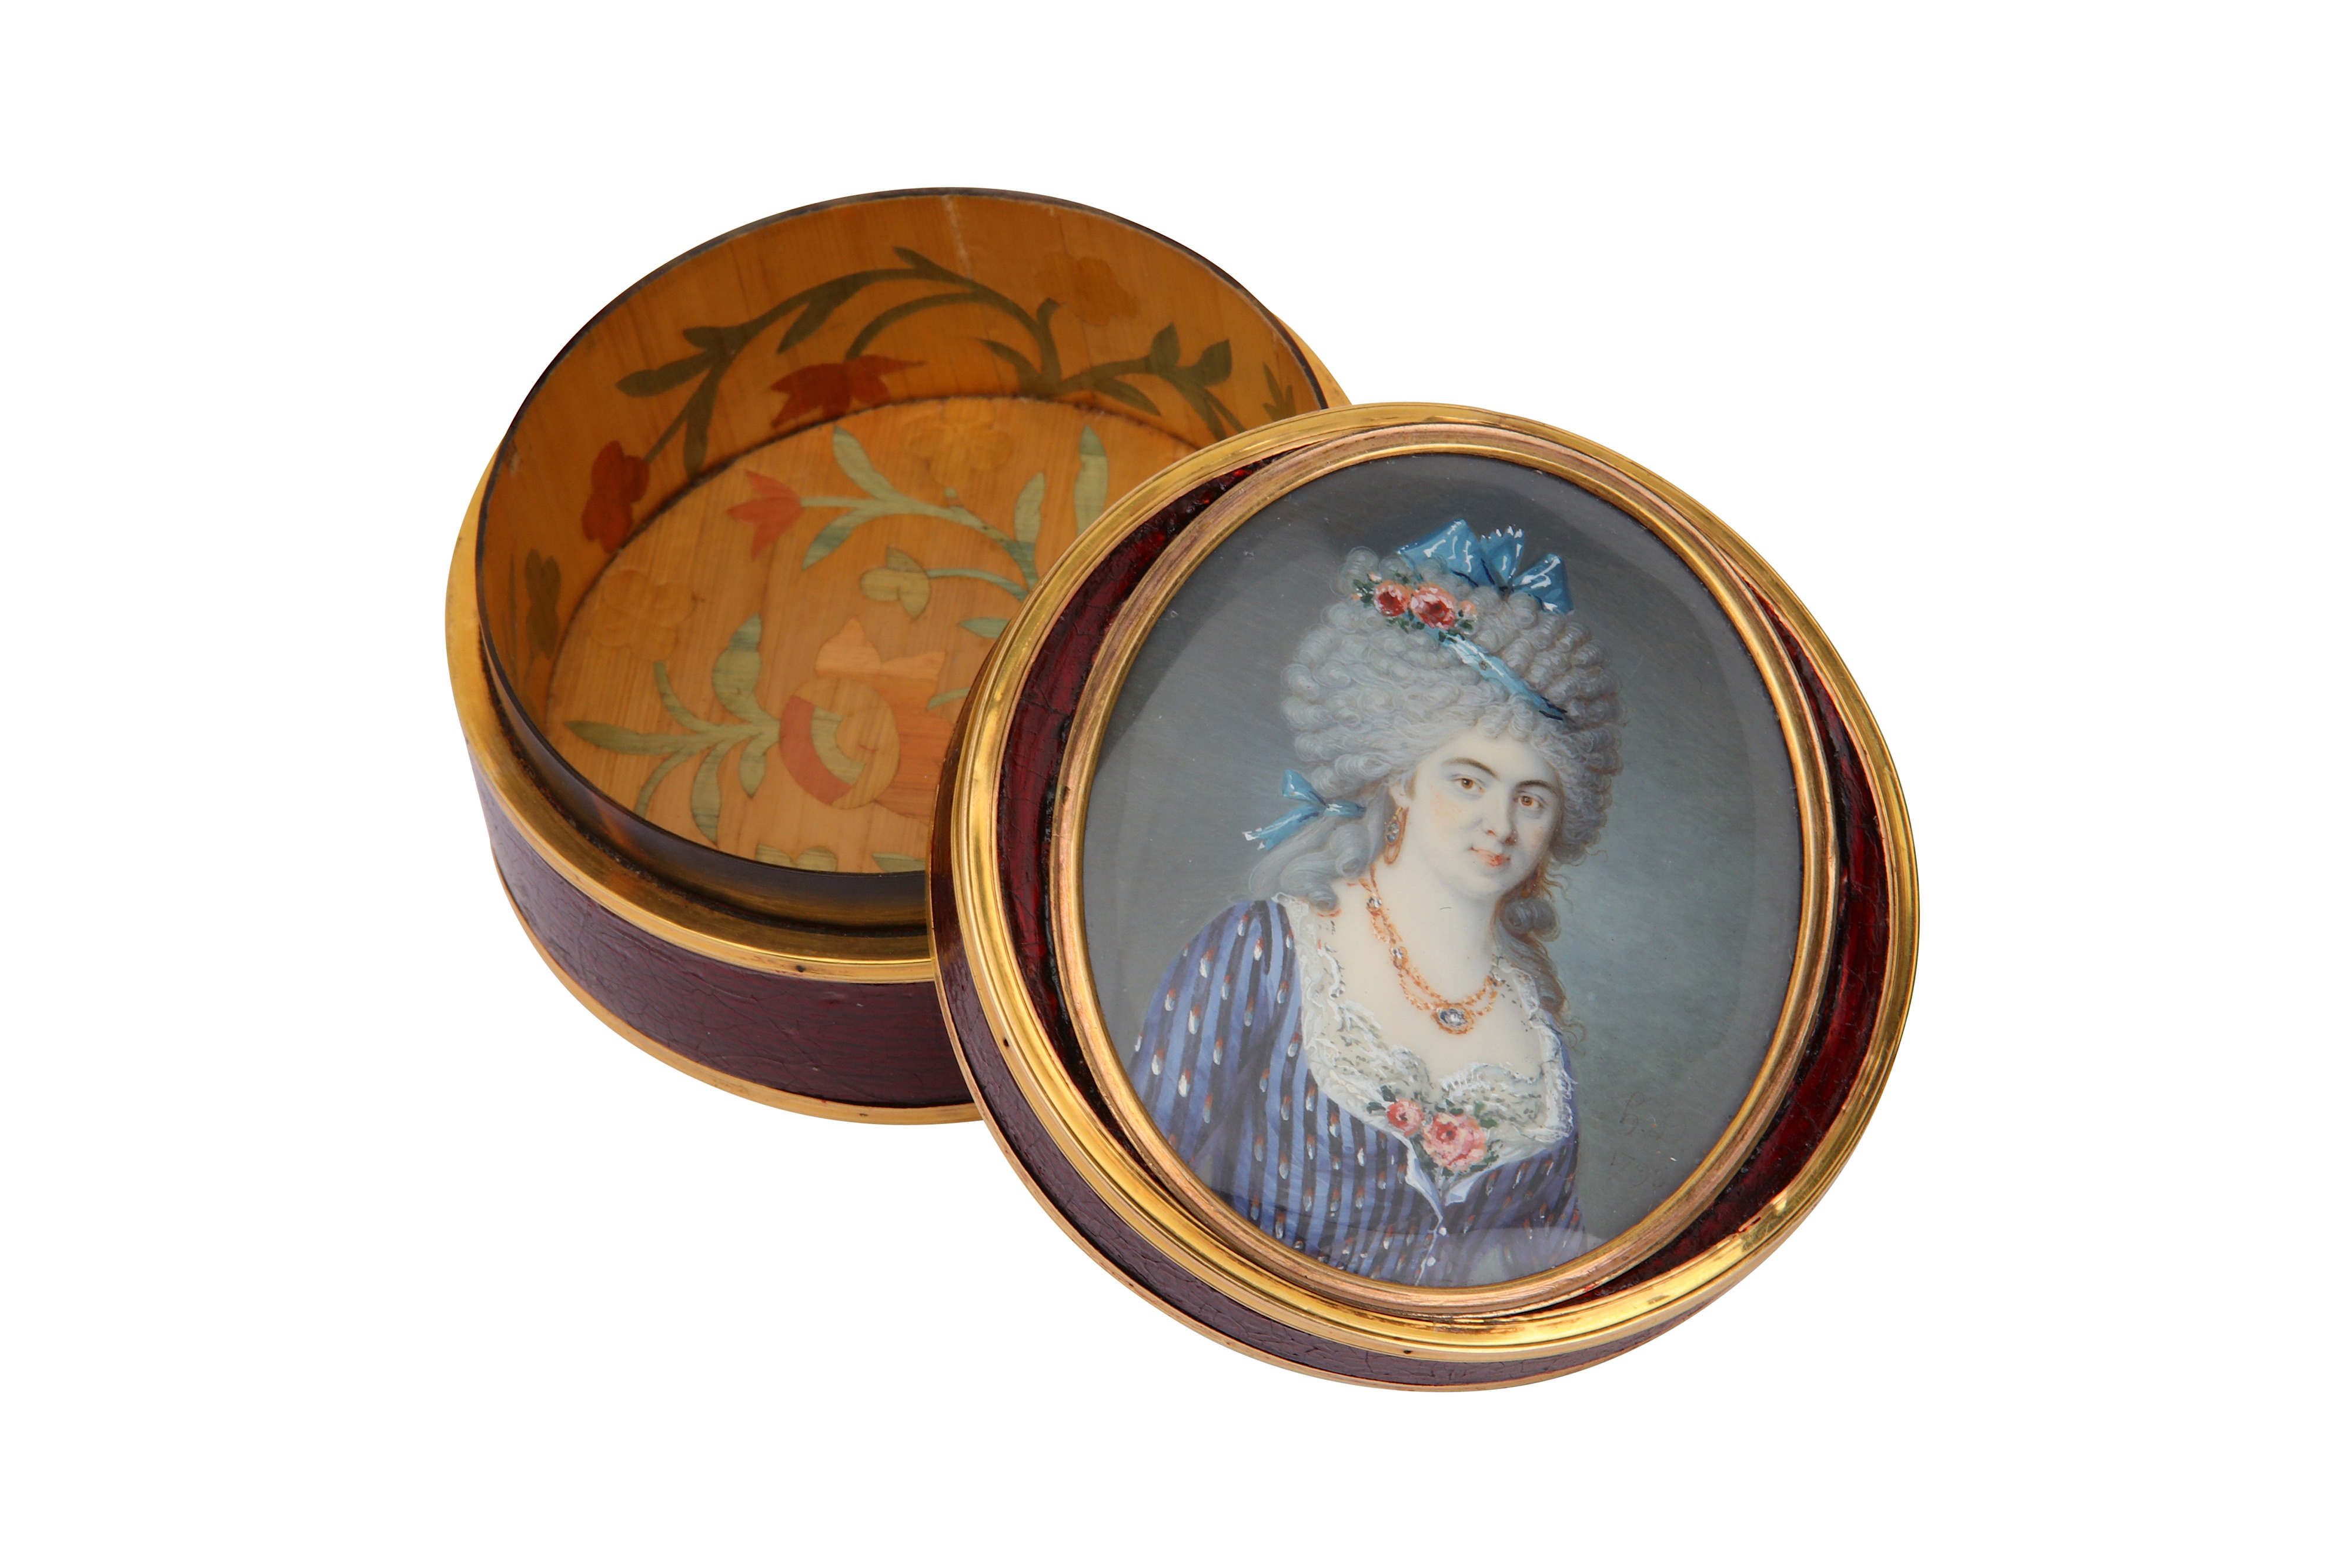 An unusual late 18th century French or Swiss gold mounted lacquer snuff box, circa 1793 - Image 2 of 2